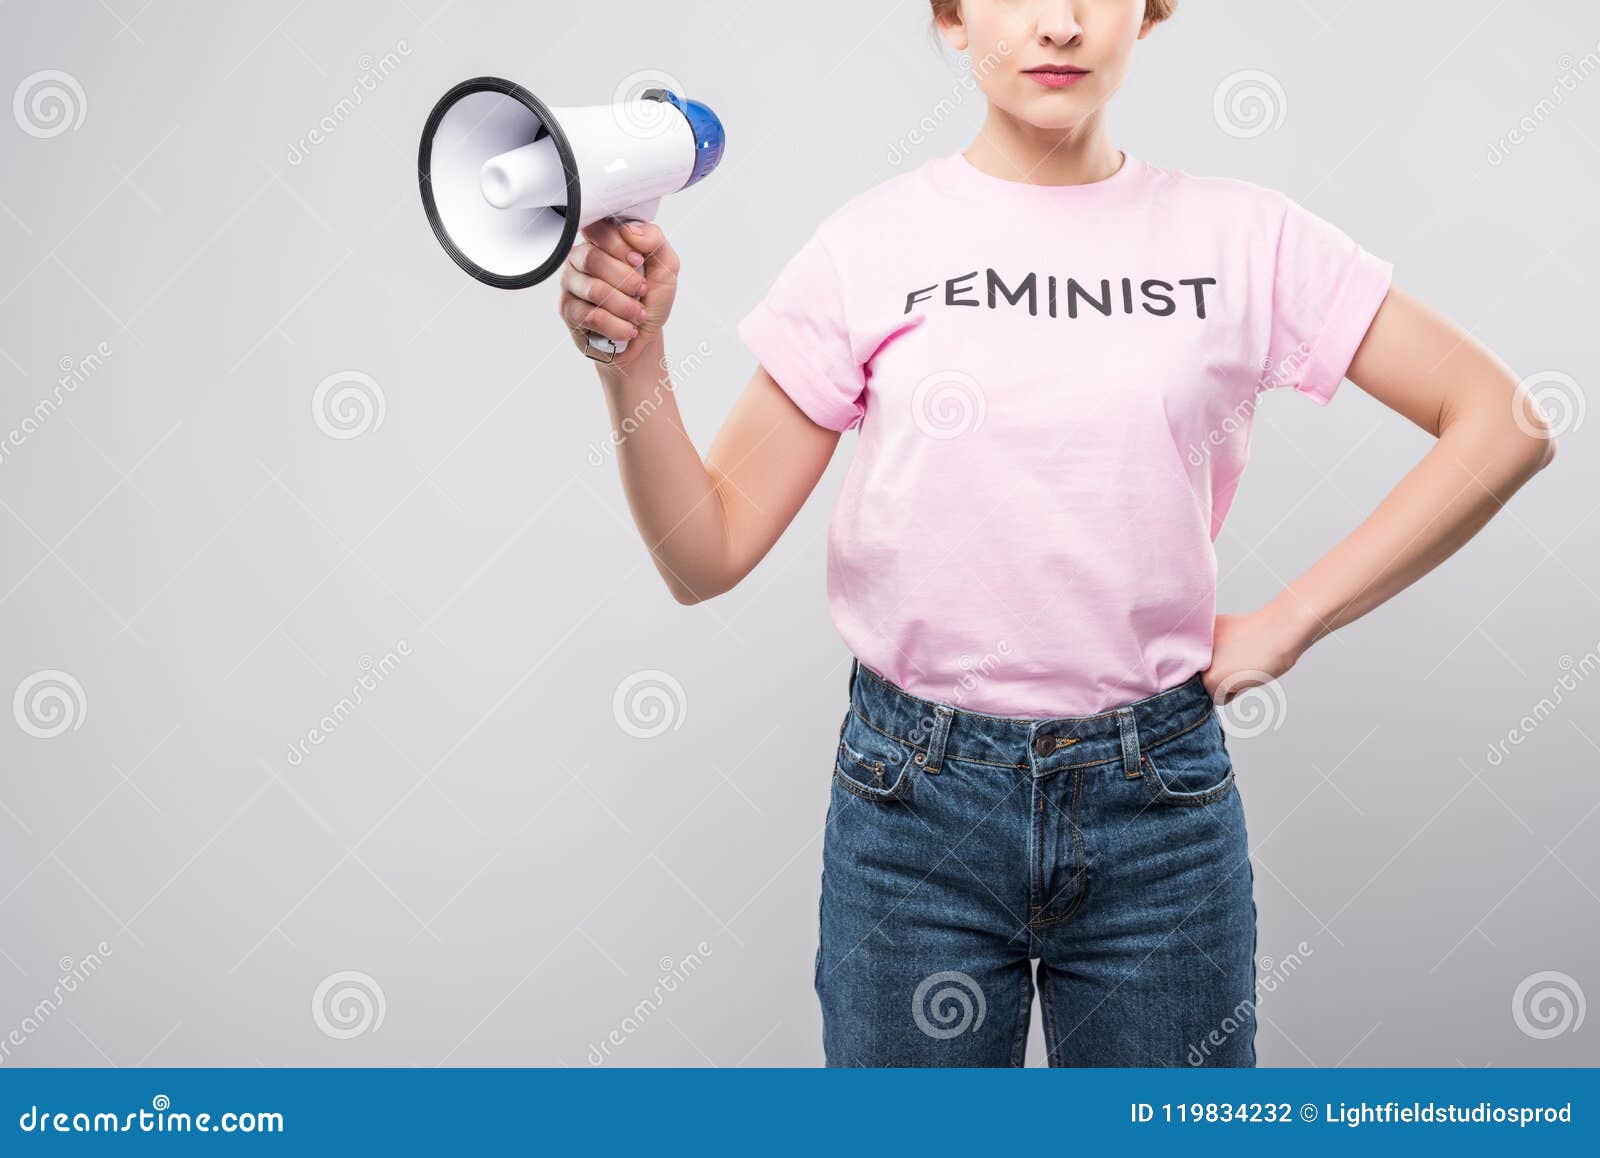 cropped view of woman in pink feminist t-shirt holding megaphone,